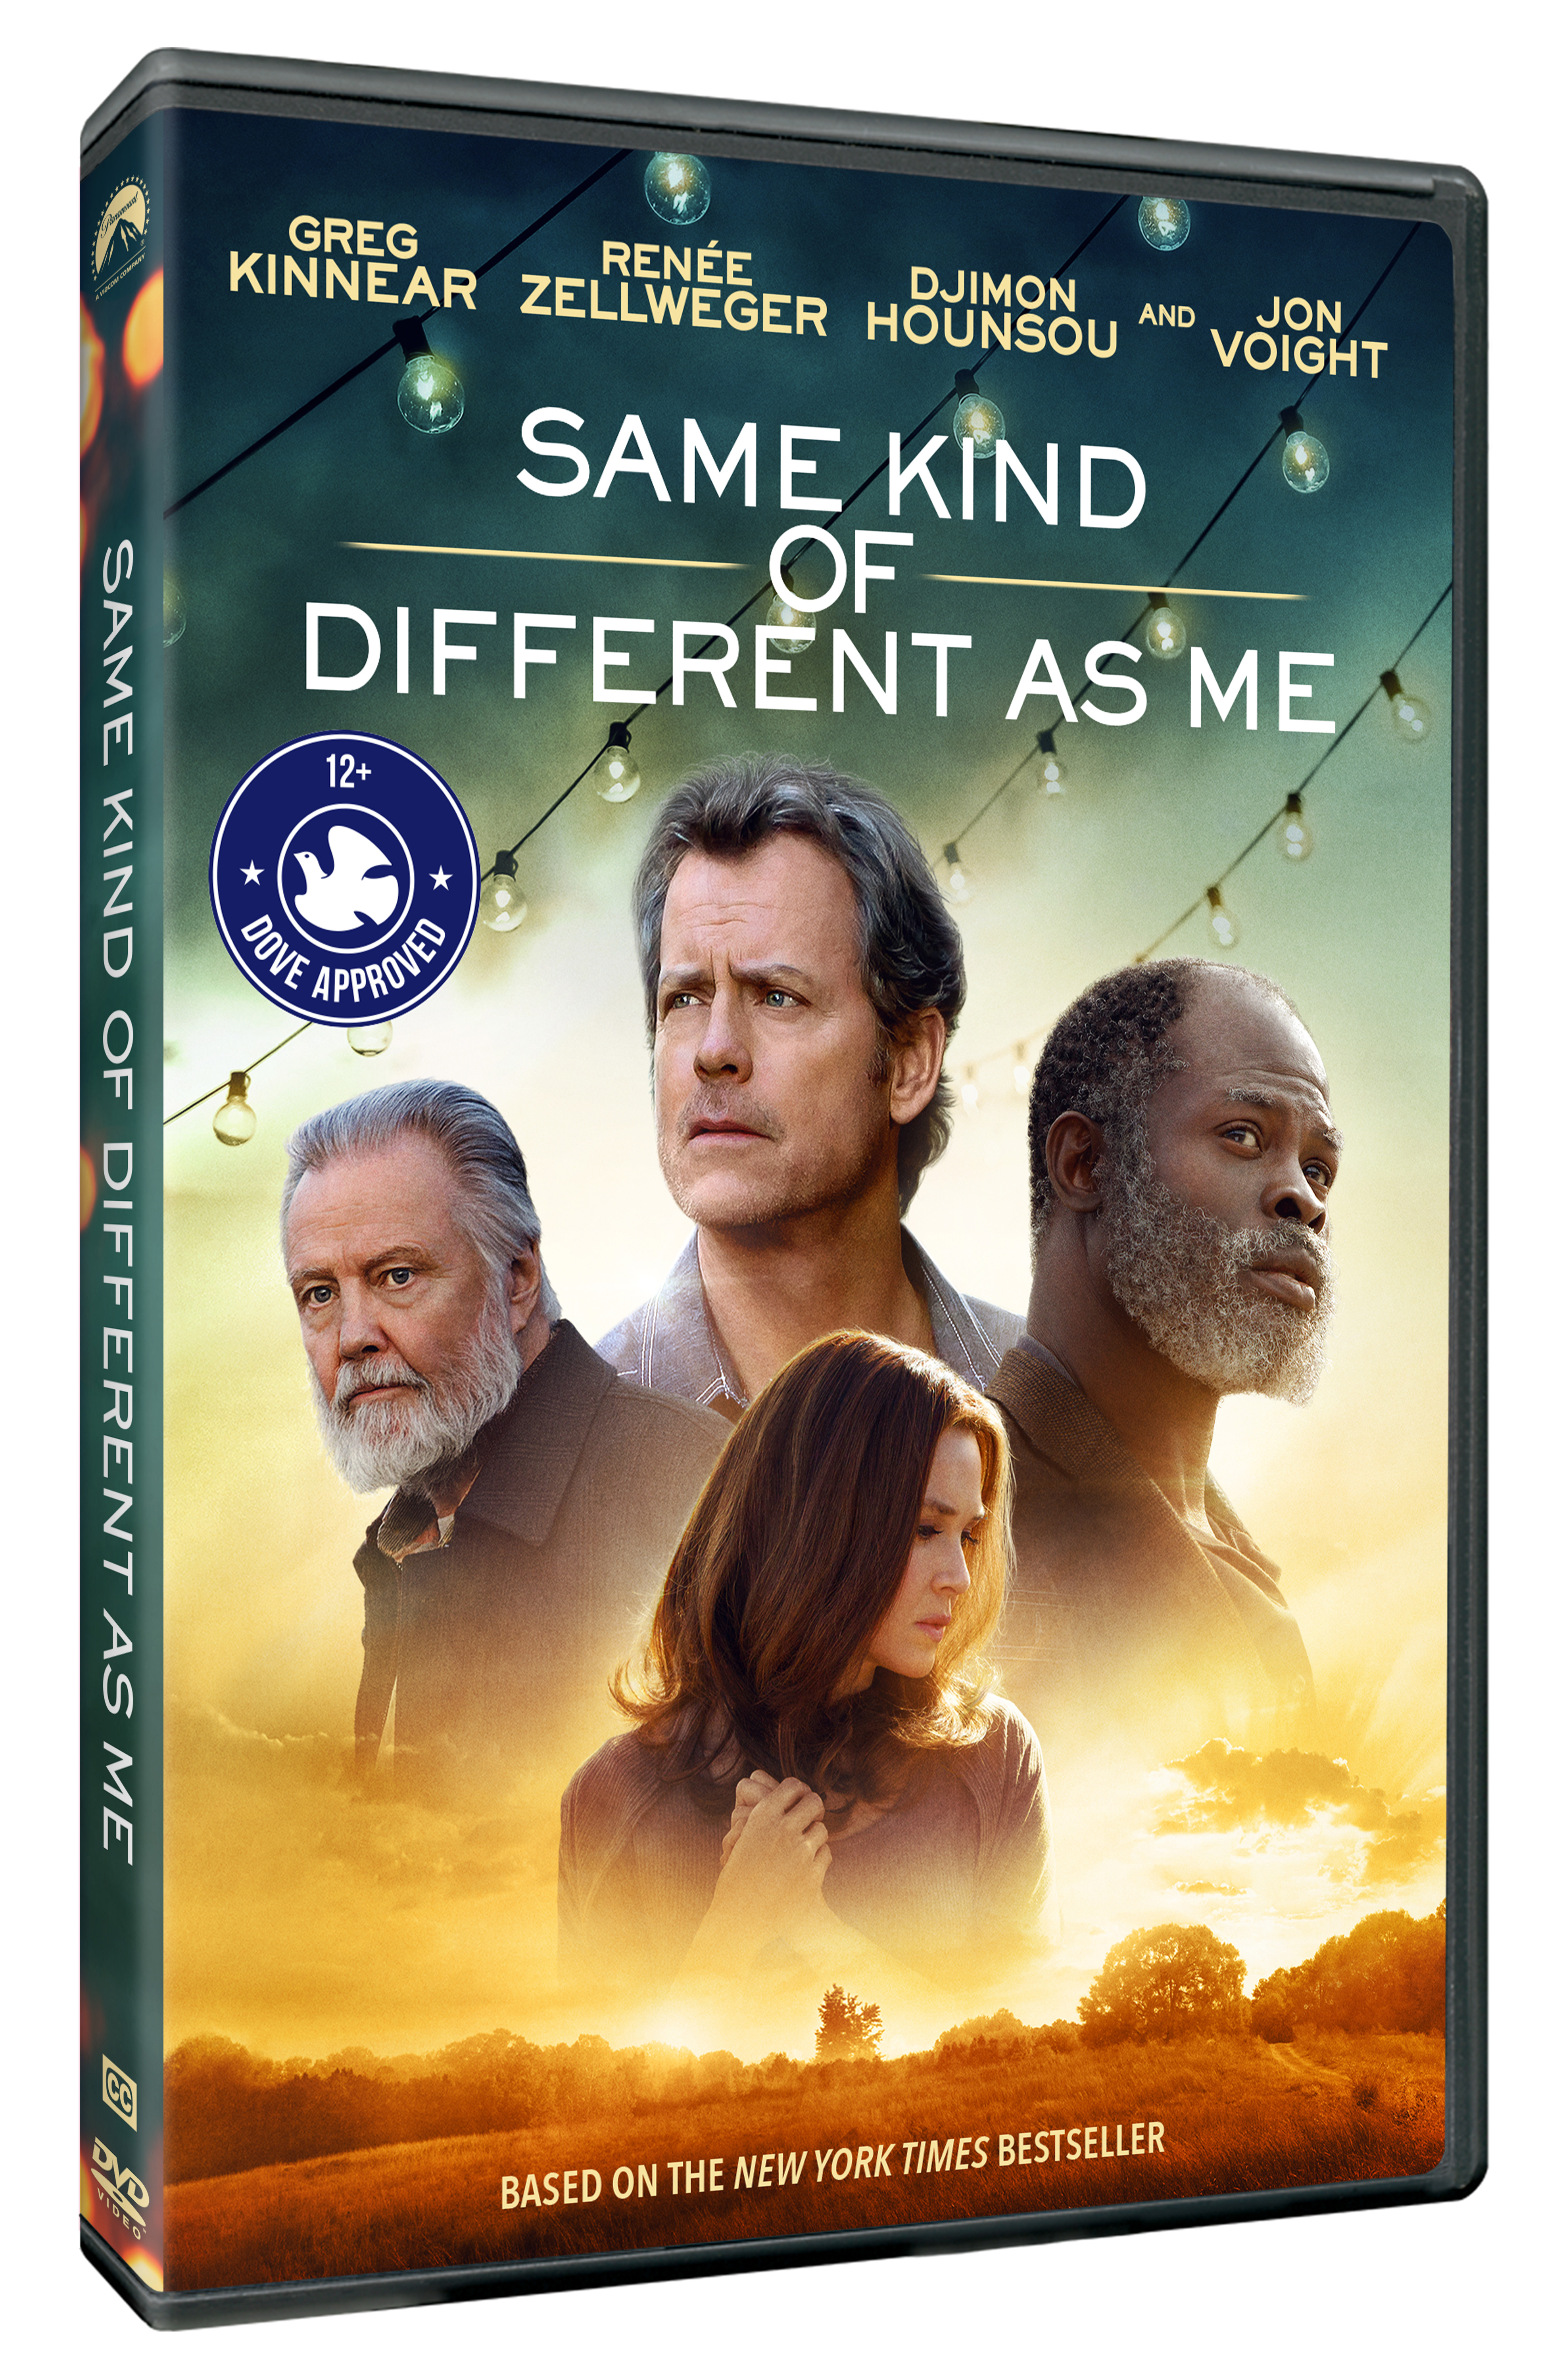 Same Kind Of Different As Me DVD cover (Paramount Home Entertainment)